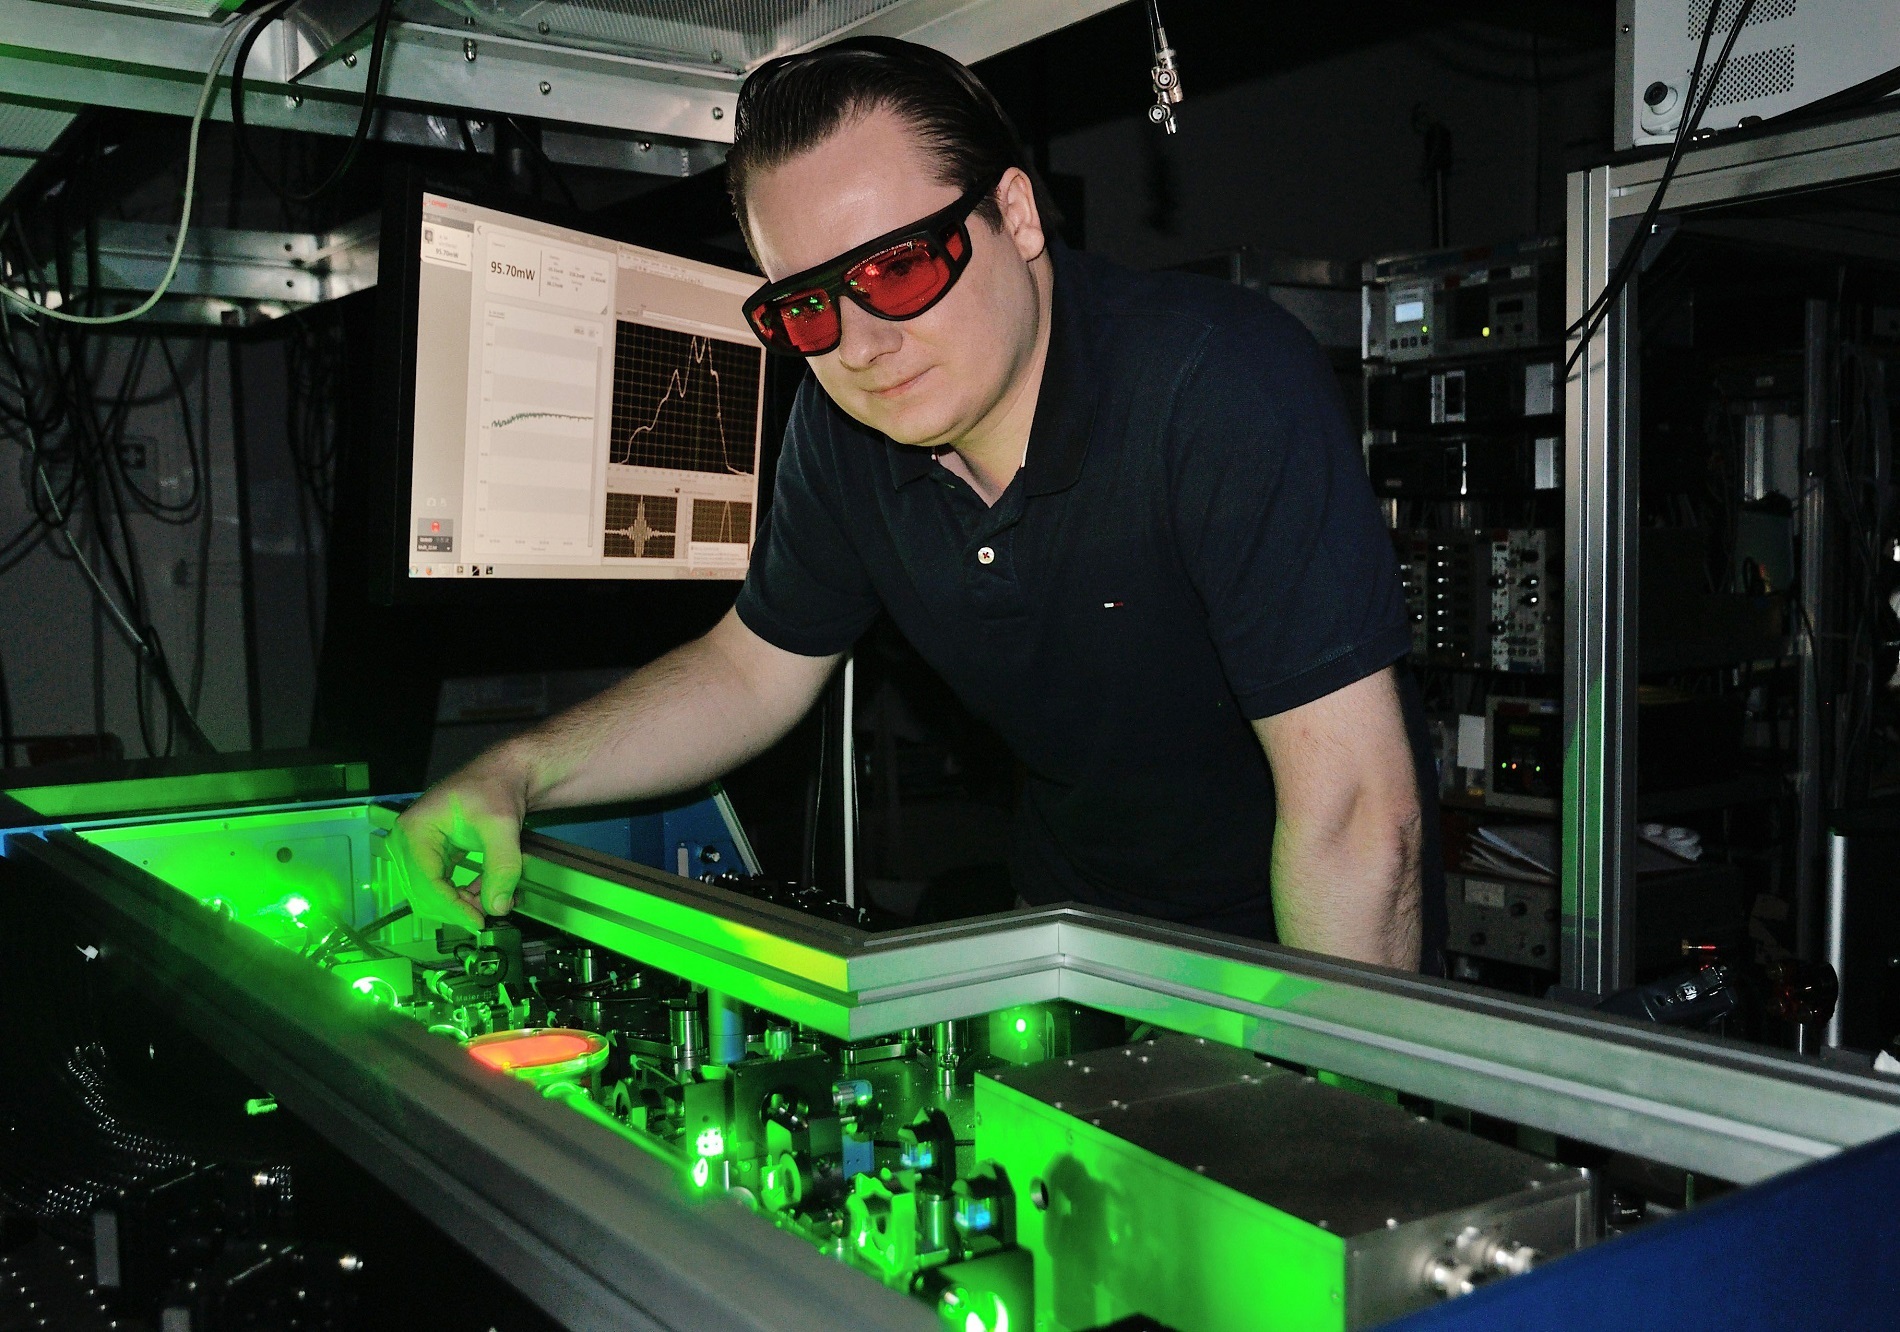 To emit electrons from the semiconductor crystal, researchers bombard it with ultra-short laser pulses.